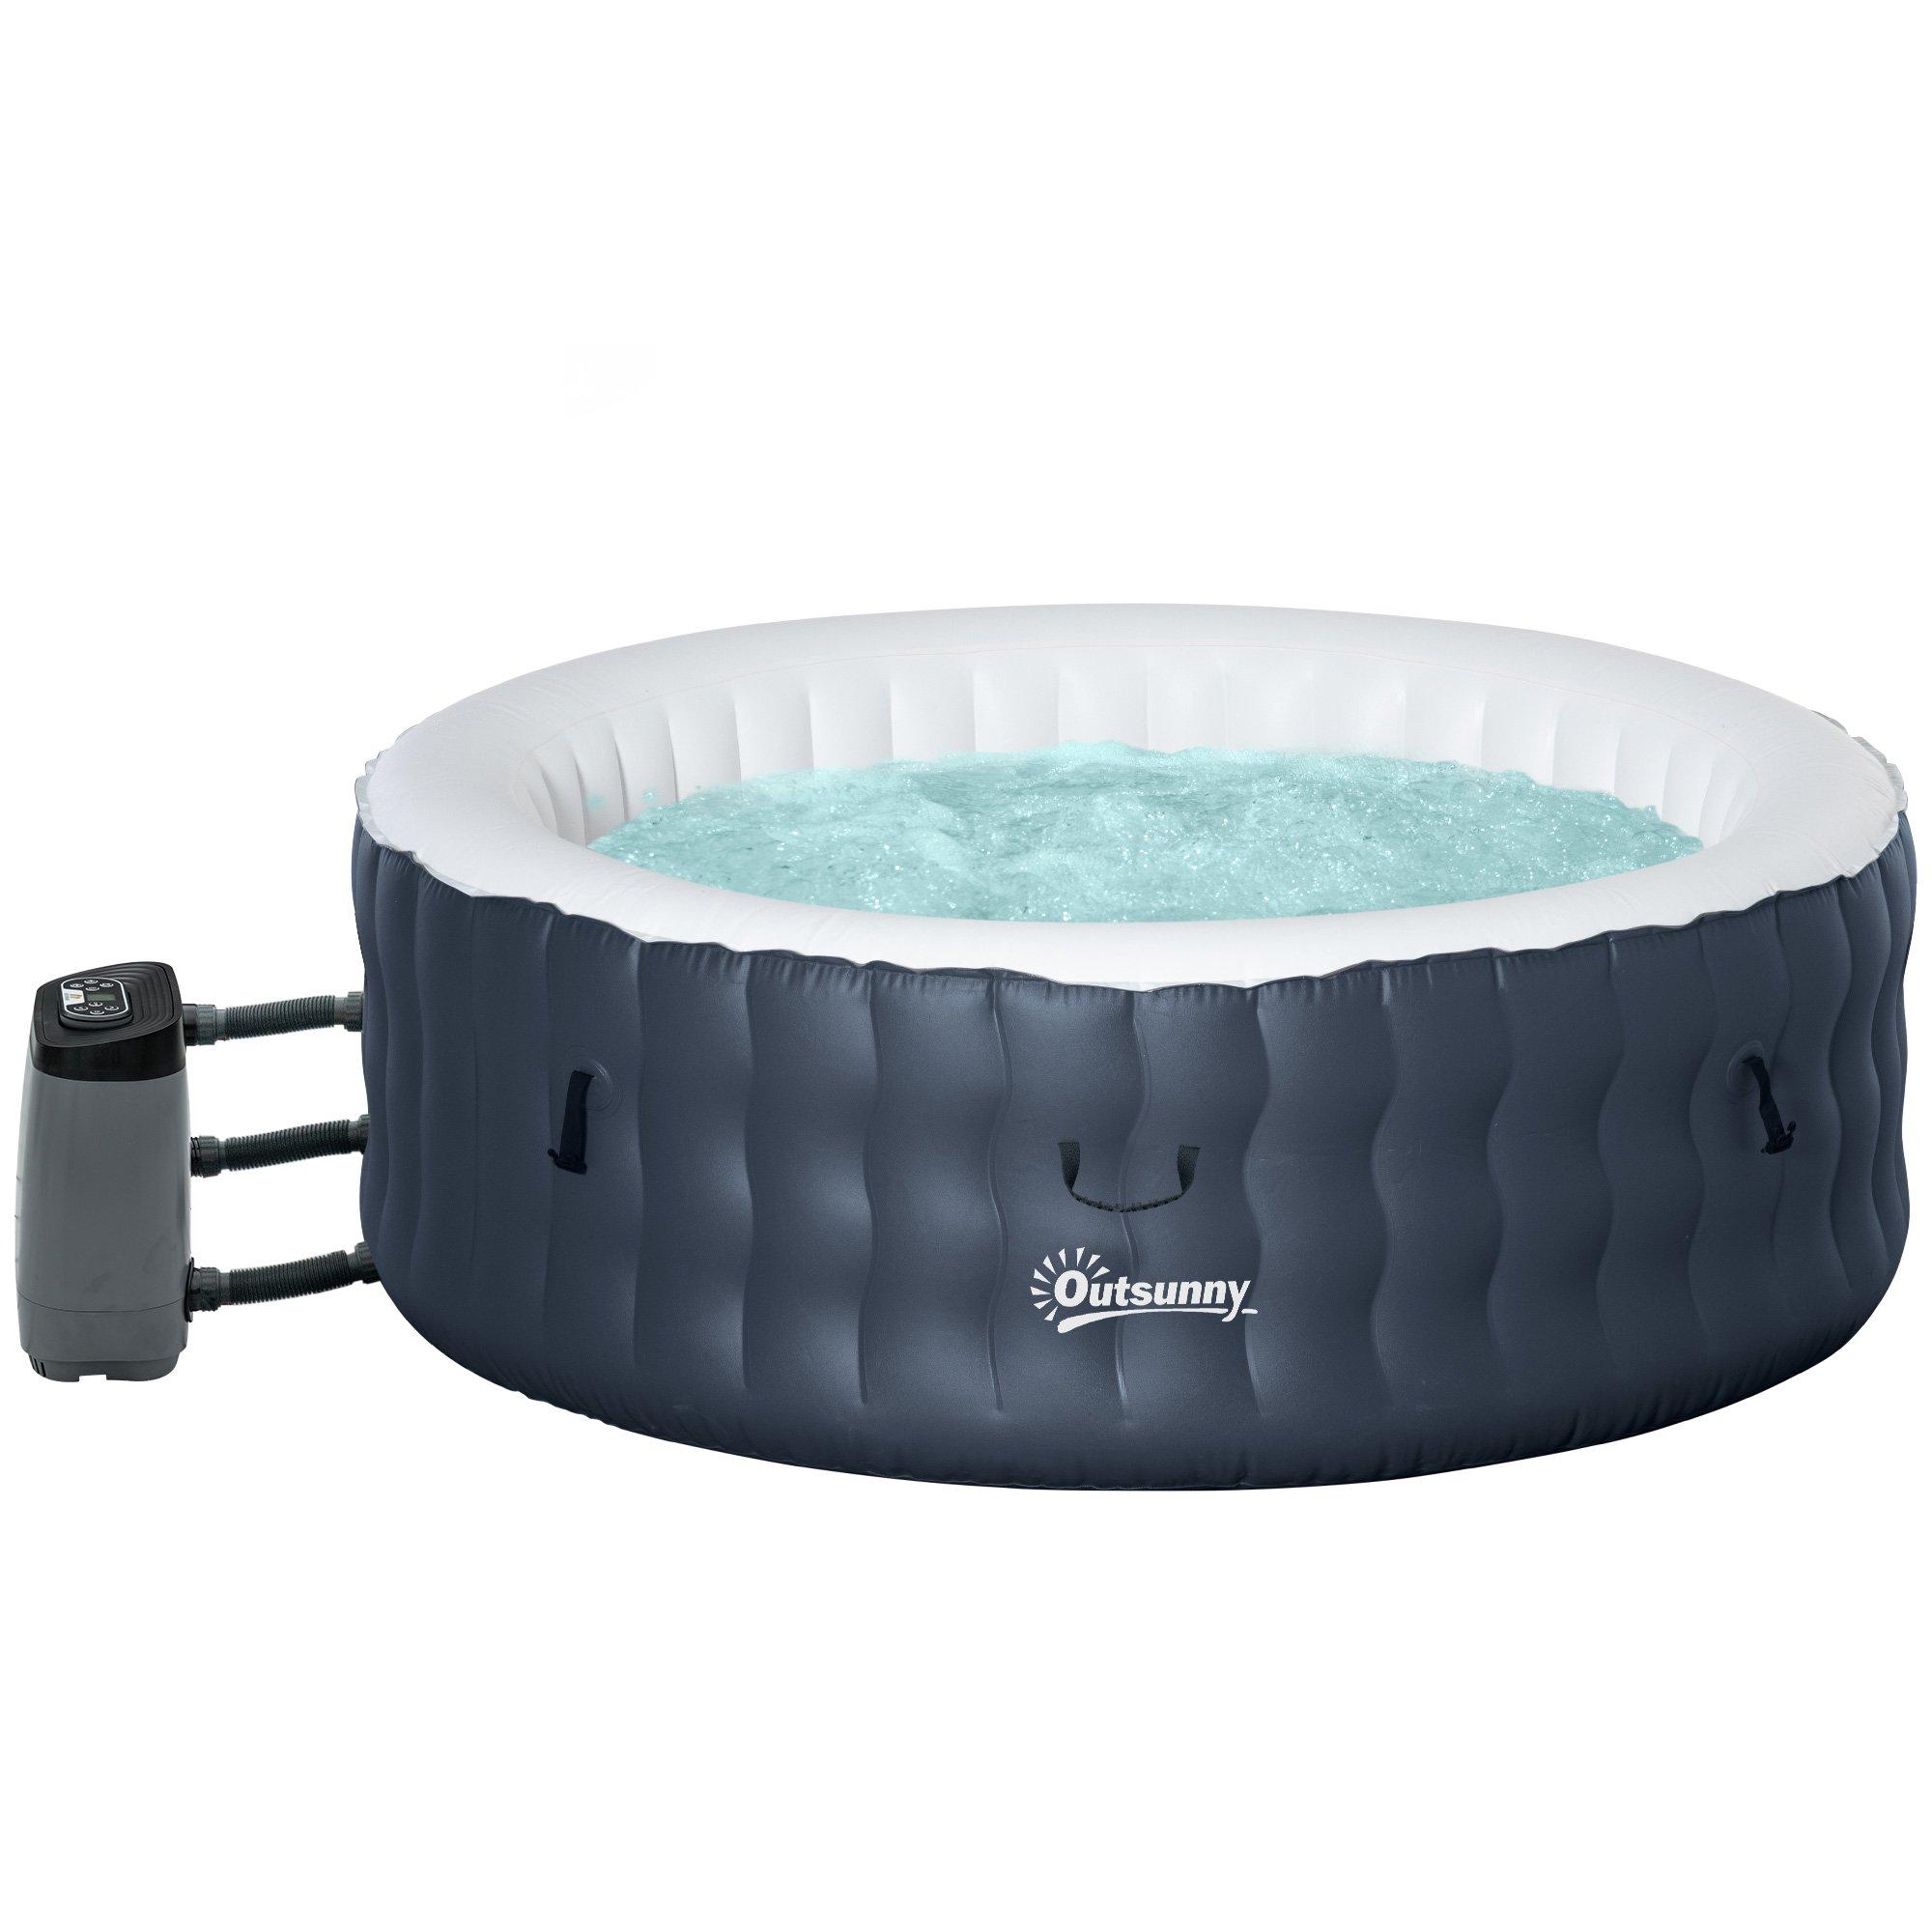 Round Inflatable Hot Tub Bubble Spa with Pump, Cover,4-6 Person